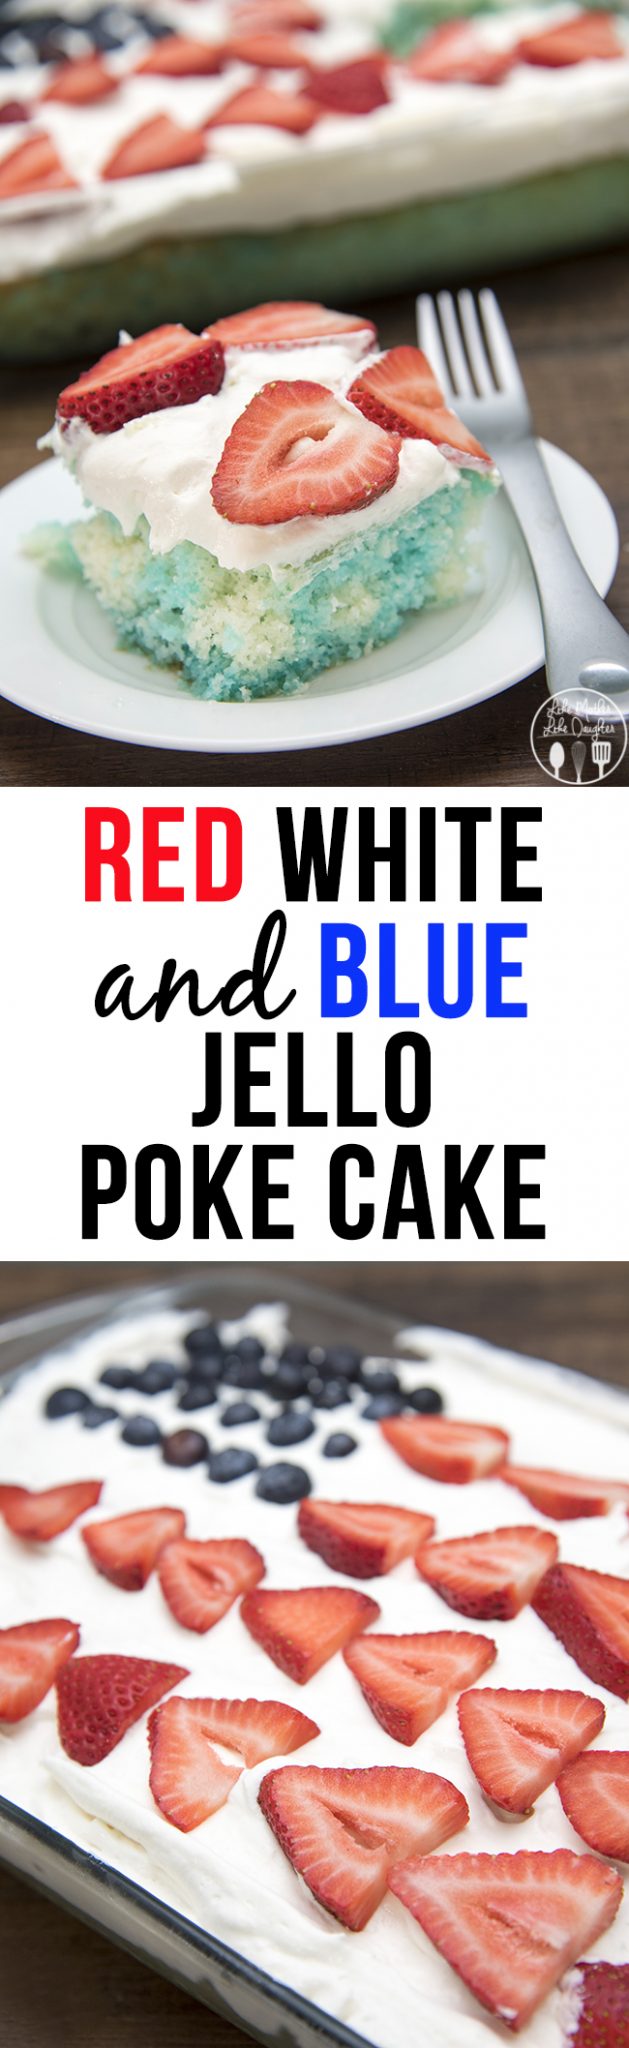 Two image collage of red white and blue jello poke cake with text title of same wording.